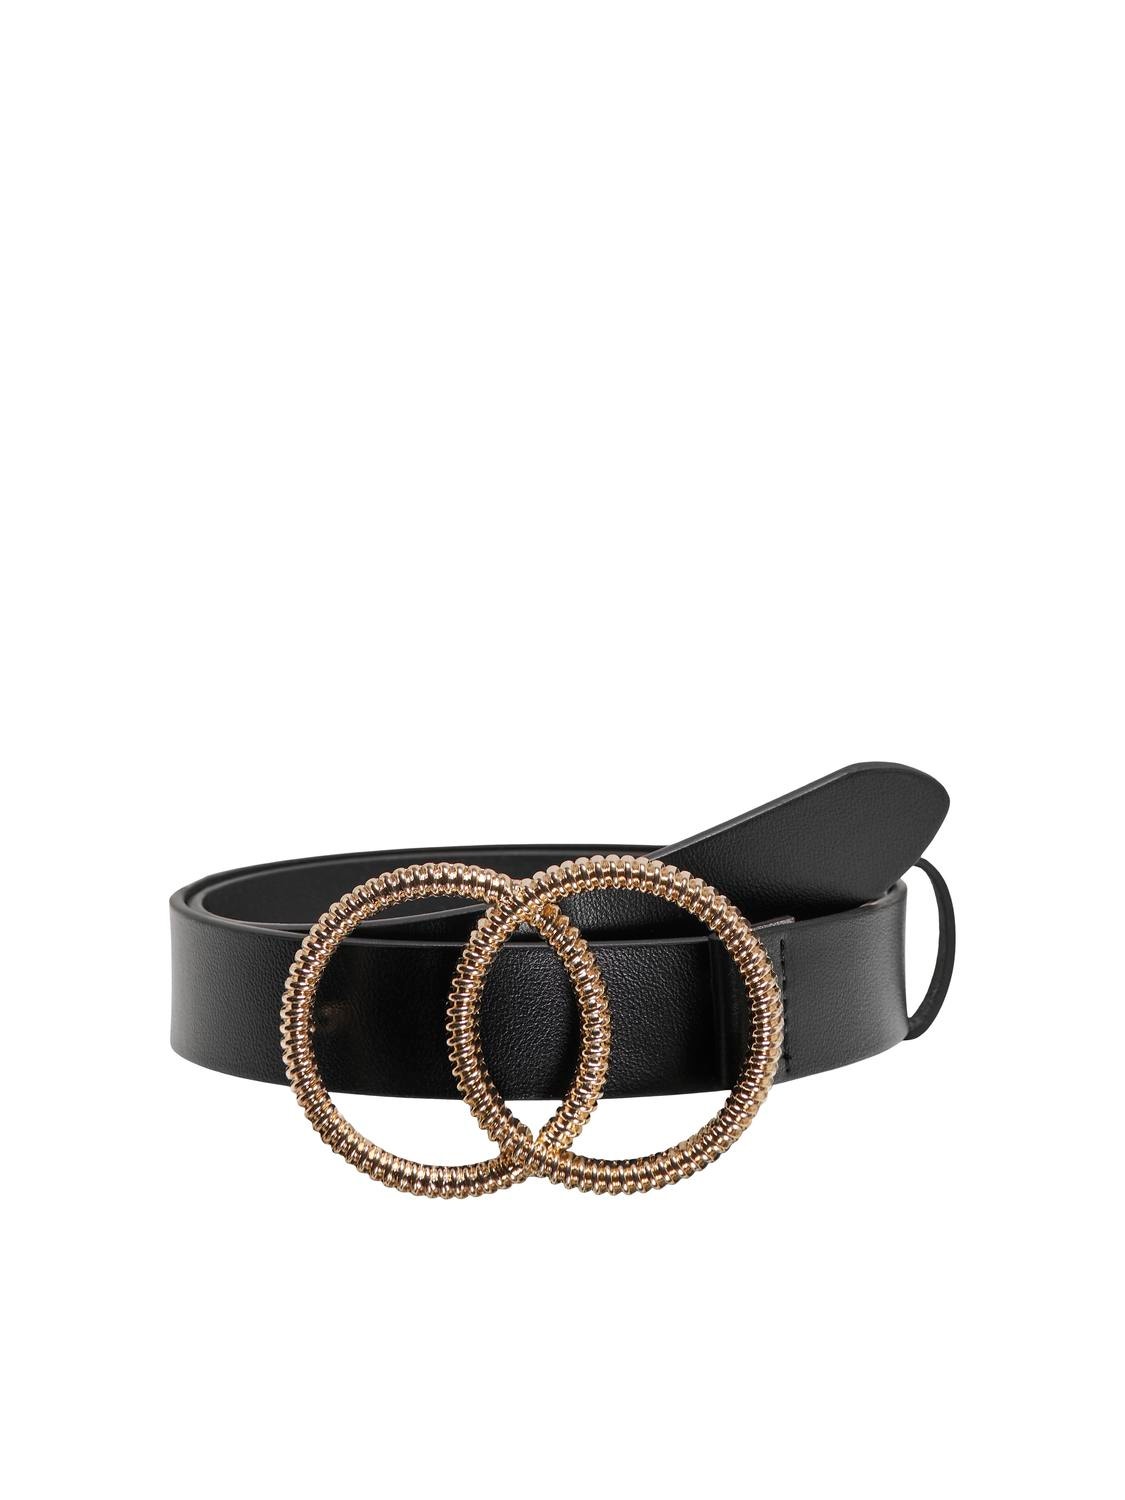 ONLY Faux leather belt -Black - 15312368